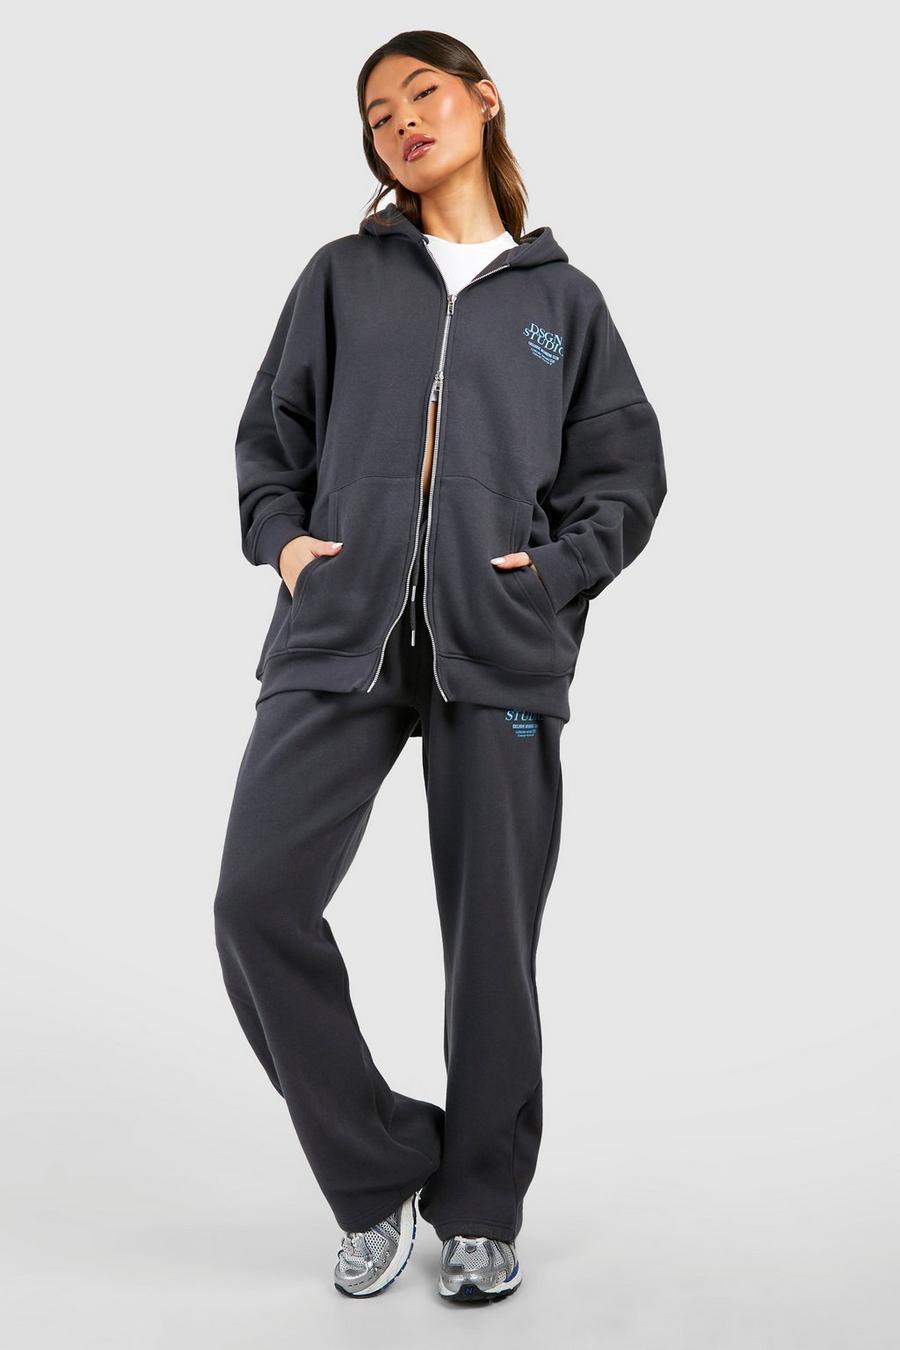 Charcoal Dsgn Studio Printed Hooded Tracksuit 